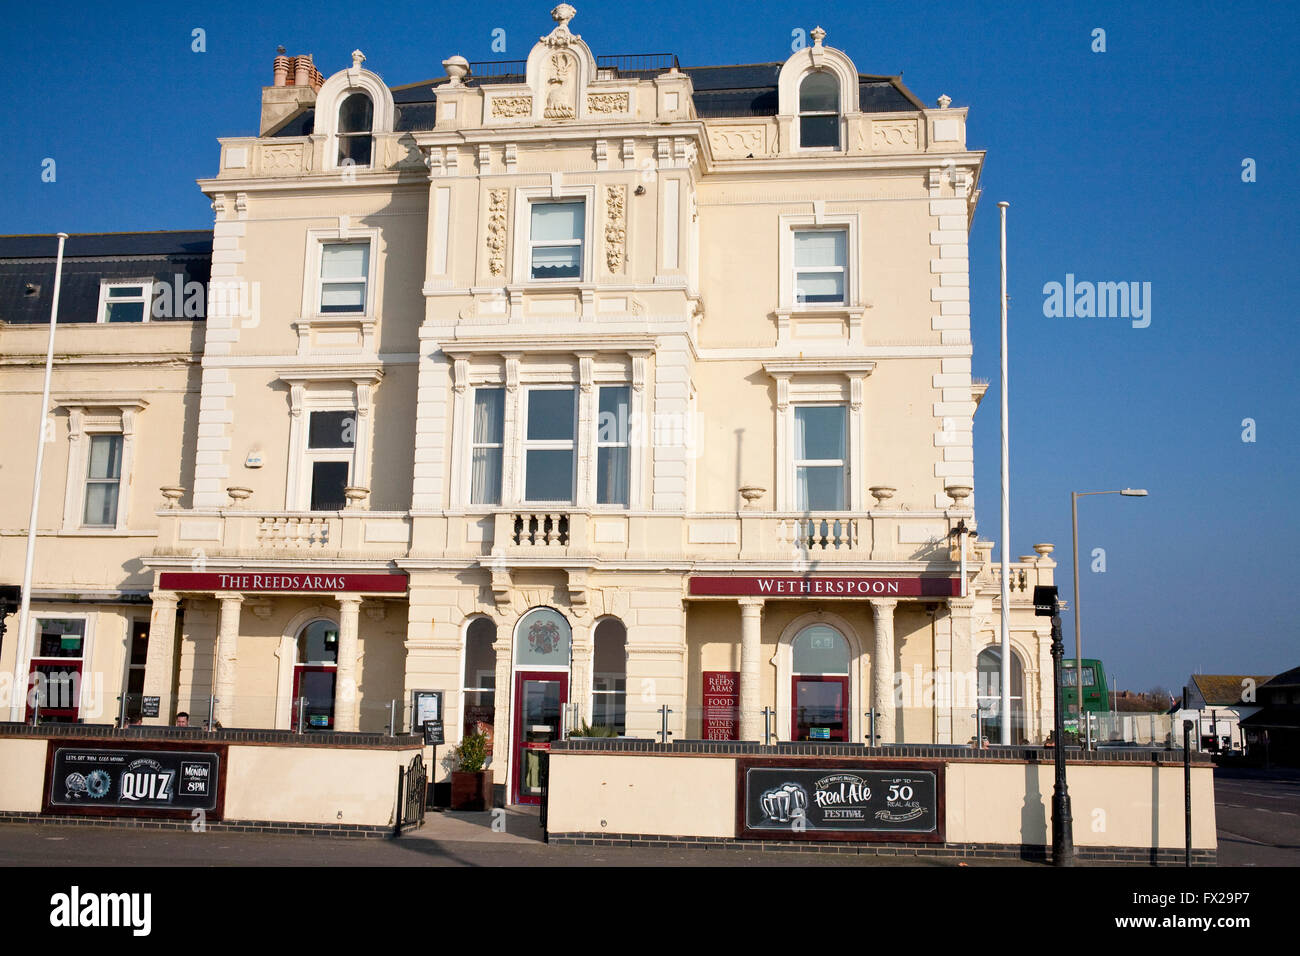 Wetherspoon public house, the Reeds arms, in Burnham on sea, Somerset on a sunny day Stock Photo